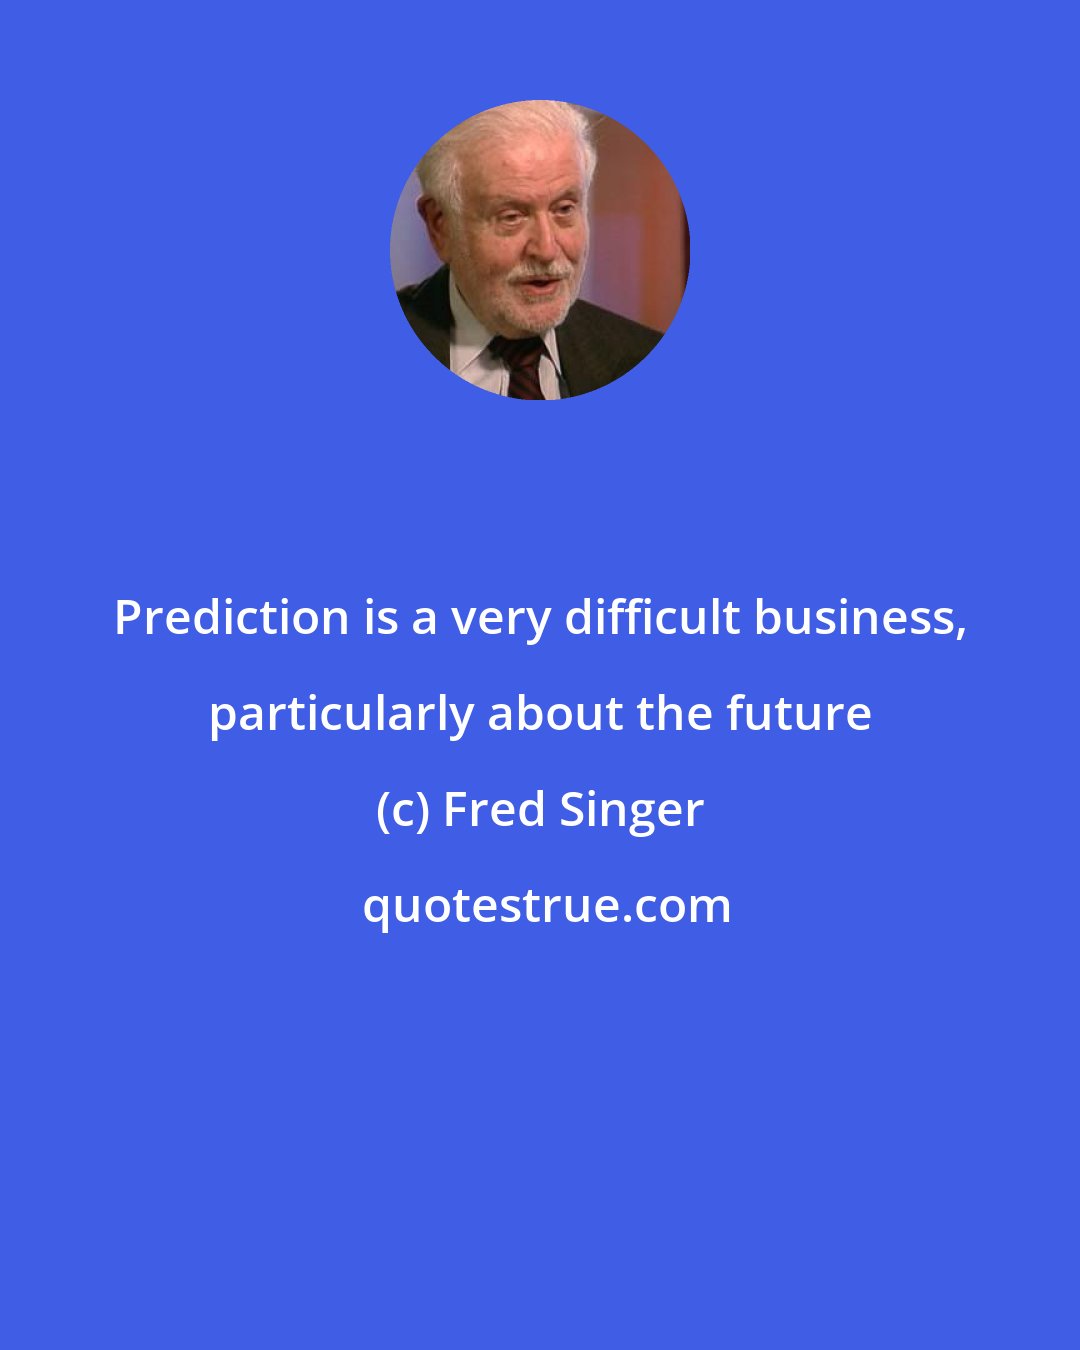 Fred Singer: Prediction is a very difficult business, particularly about the future